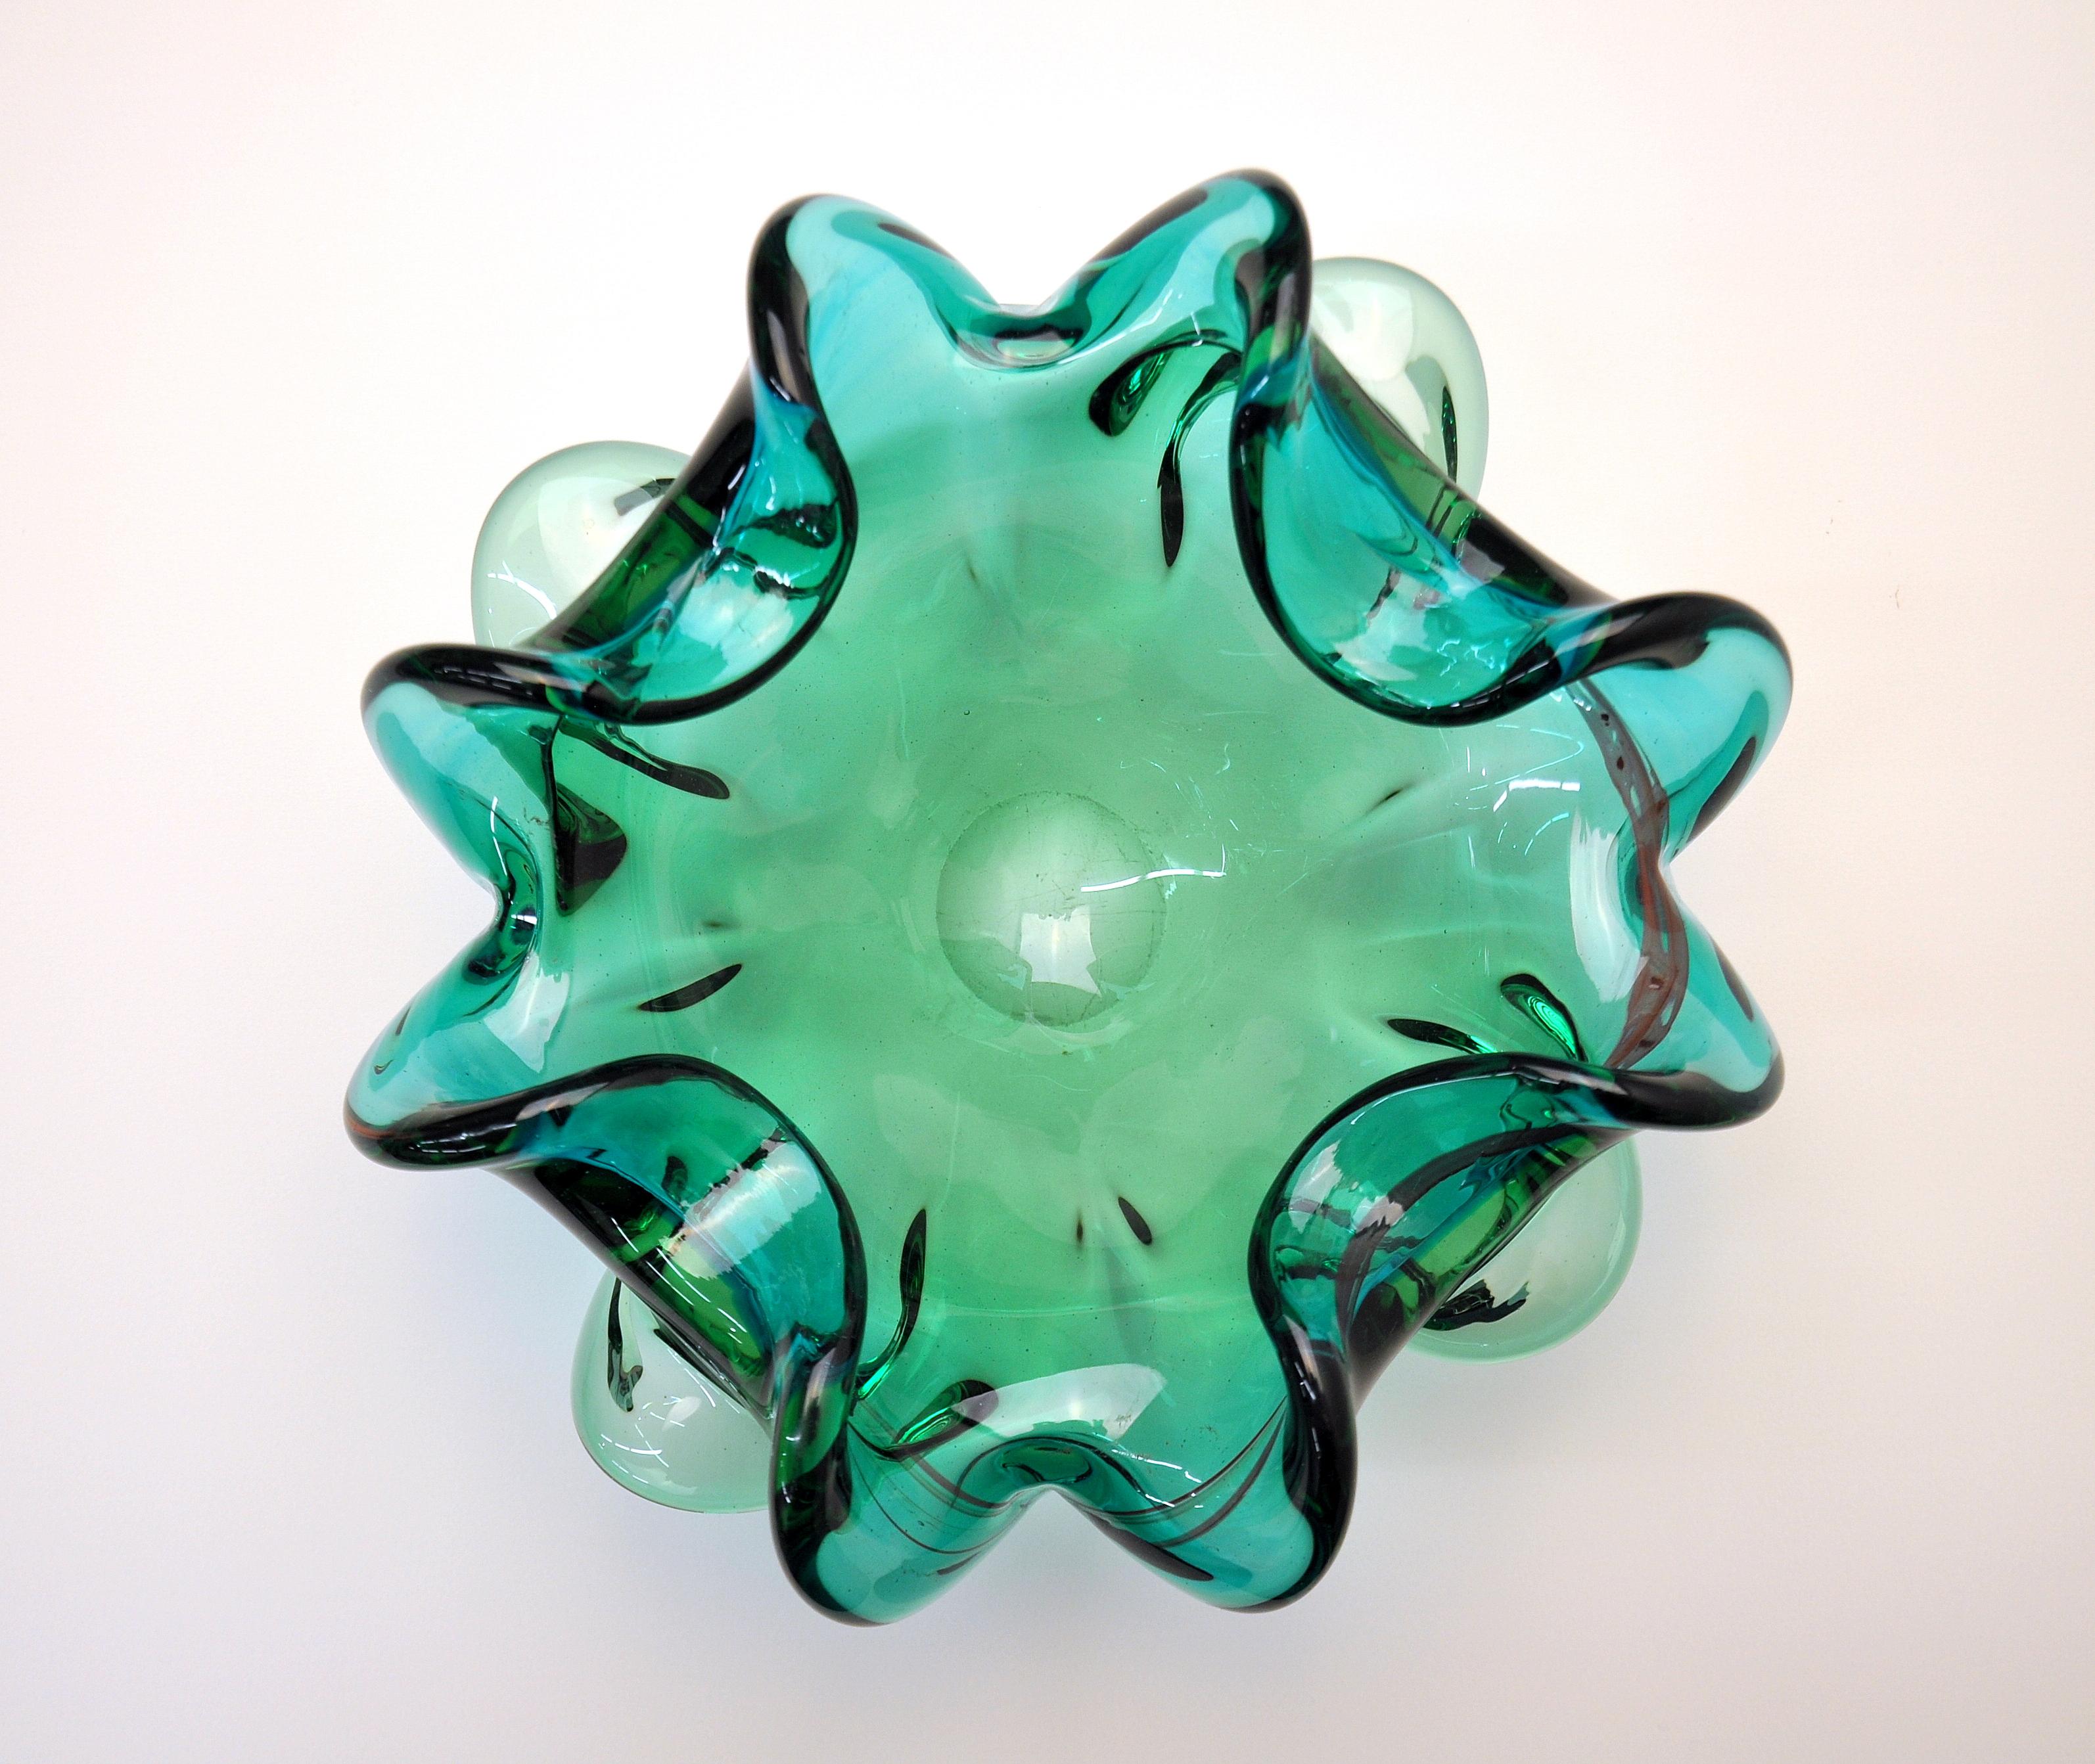 Vintage Mid-Century Modern hand blown Venetian glass vide-poche, decorative bowl or cigar ashtray with organic floral form. It features a vibrant hue of jewel tone green and pinched rims with flared sides. A great example of Italian Mid-Century